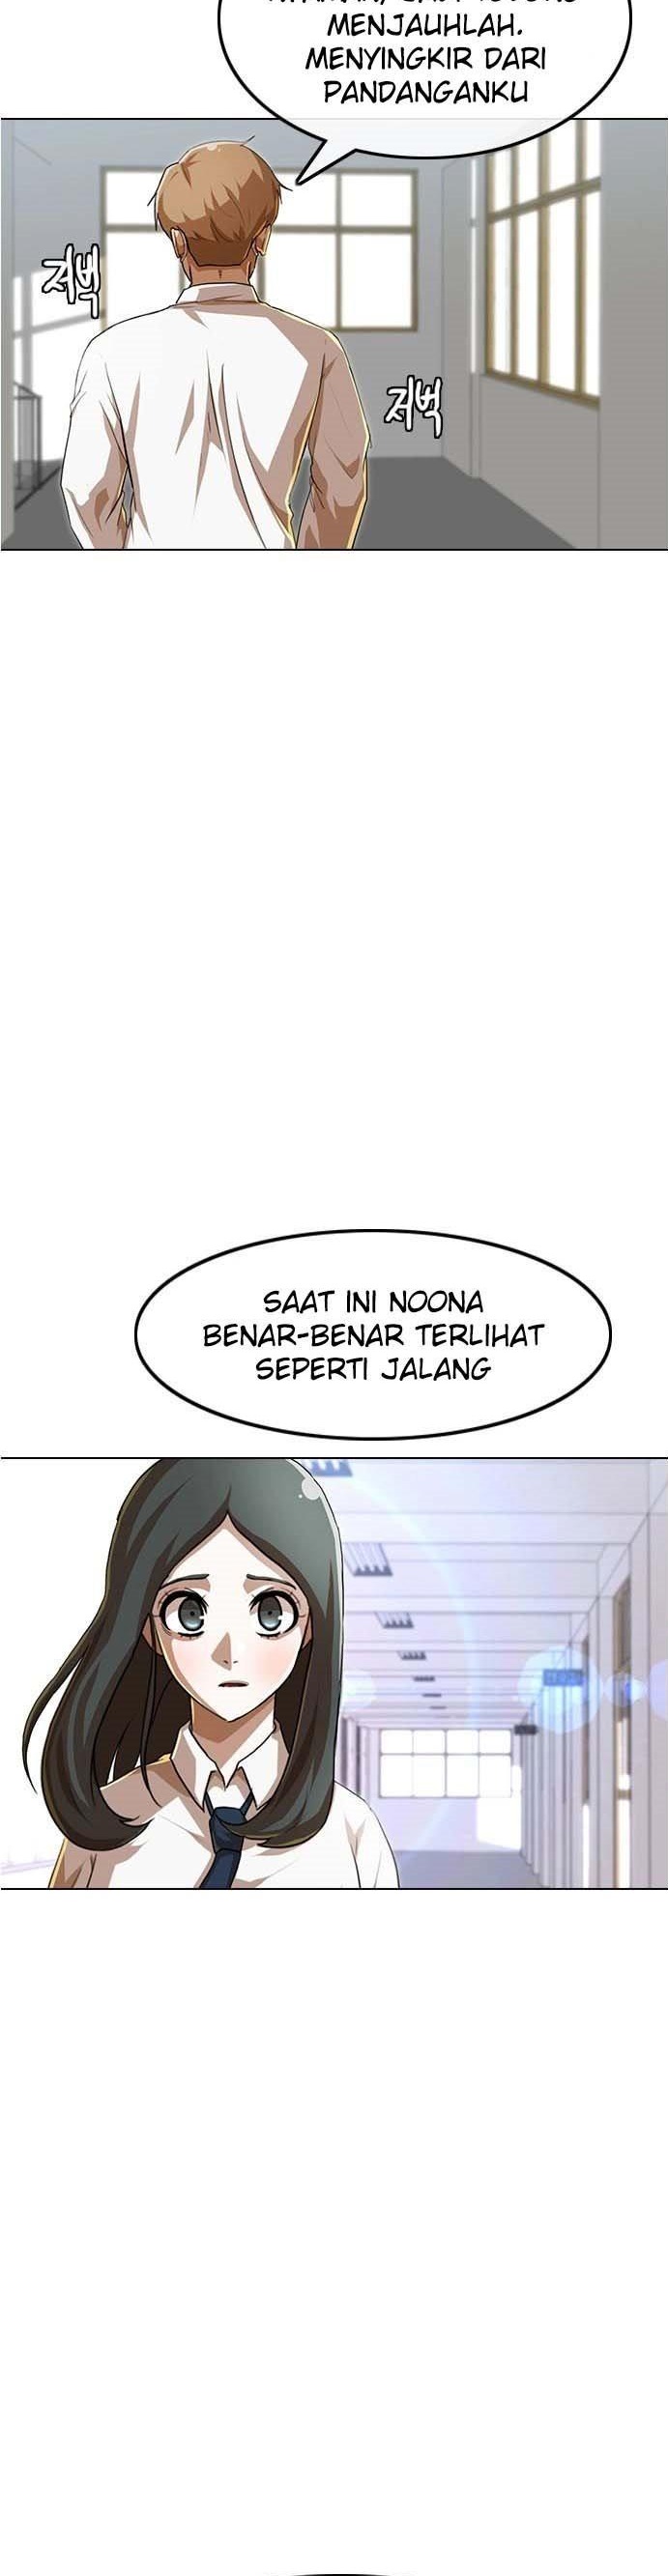 The Girl from Random Chatting! Chapter 86